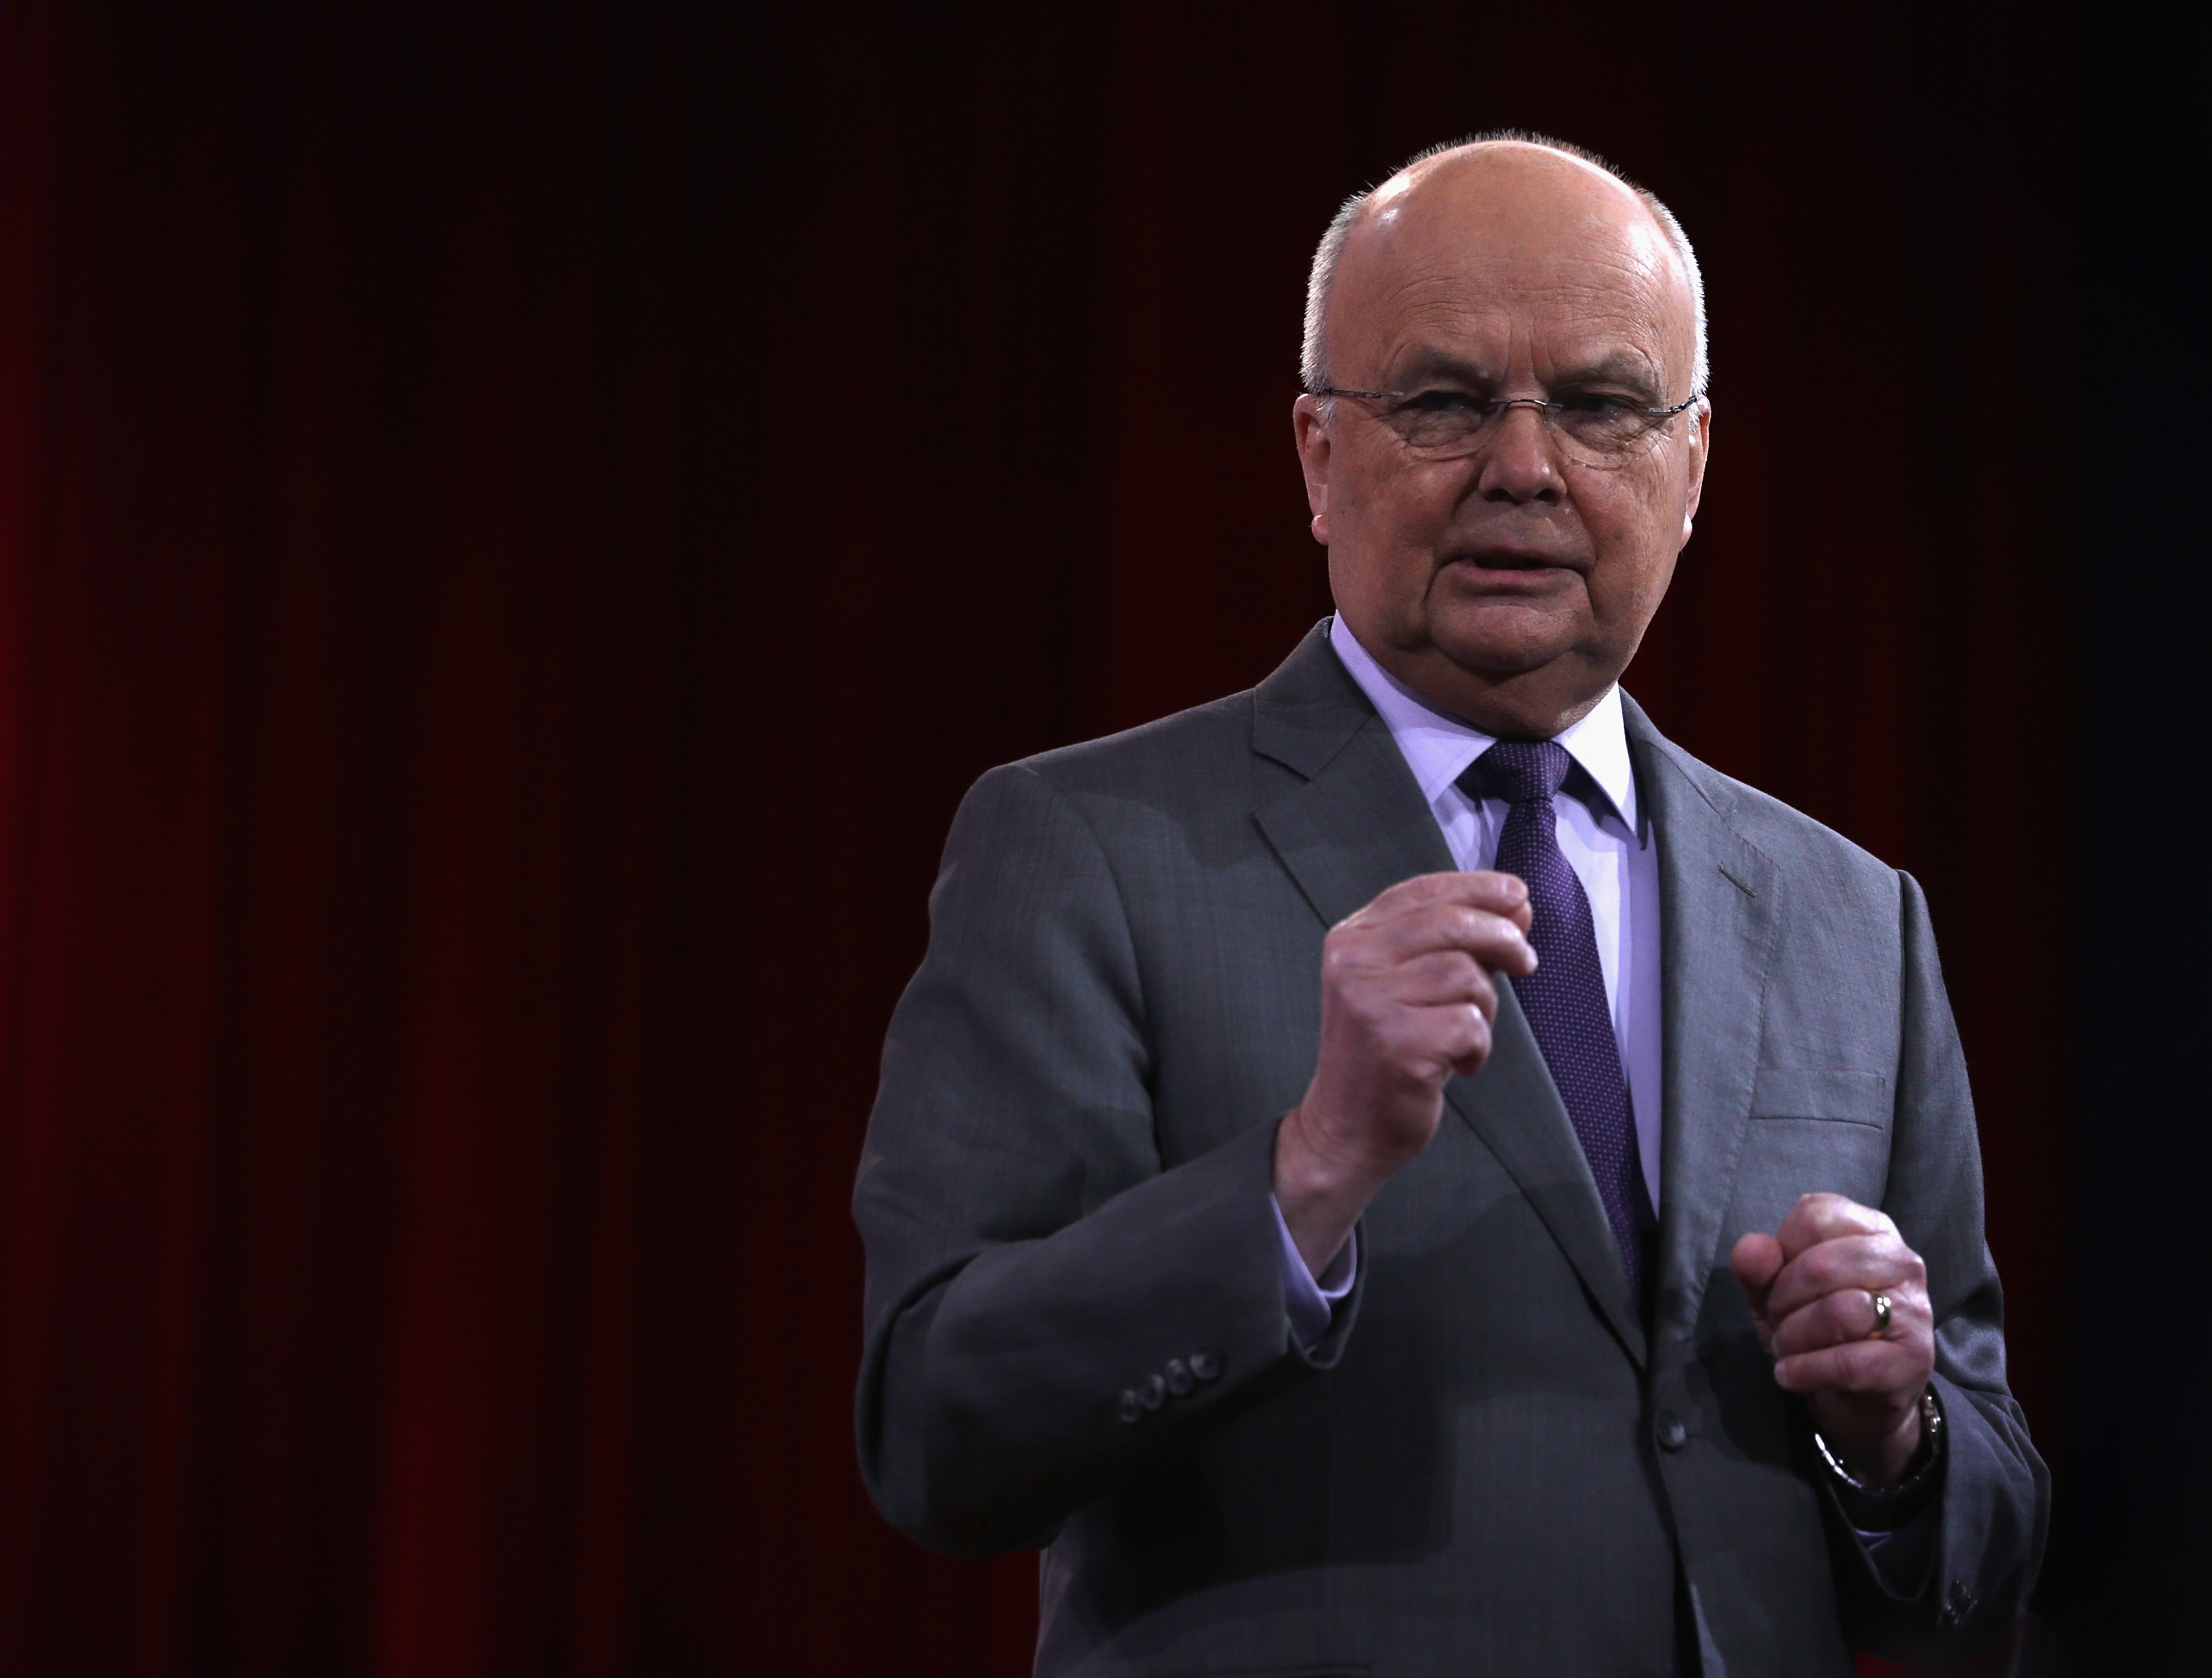 Former CIA and NSA director Gen. Michael Hayden (Ret.) speaks during a discussion at the 42nd annual Conservative Political Action Conference (CPAC) Feb. 27, 2015 in National Harbor, Maryland.